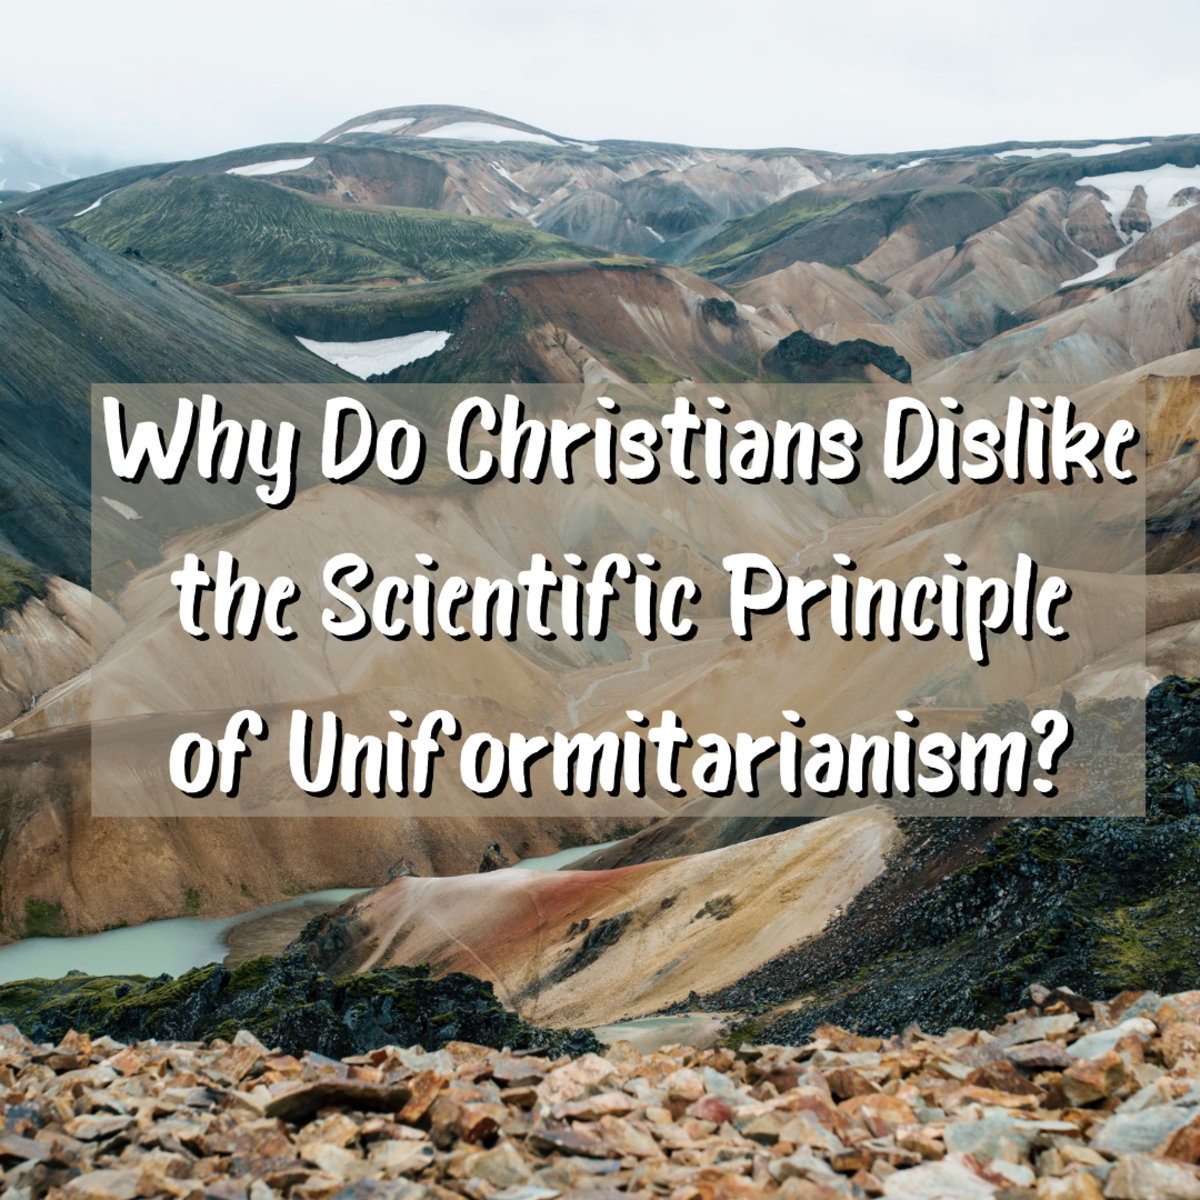 Read on to learn about the scientific principle of uniformitarianism, first proposed by the geologist John Hutton in 1830. Learn also why Christians tend to dislike this principle.